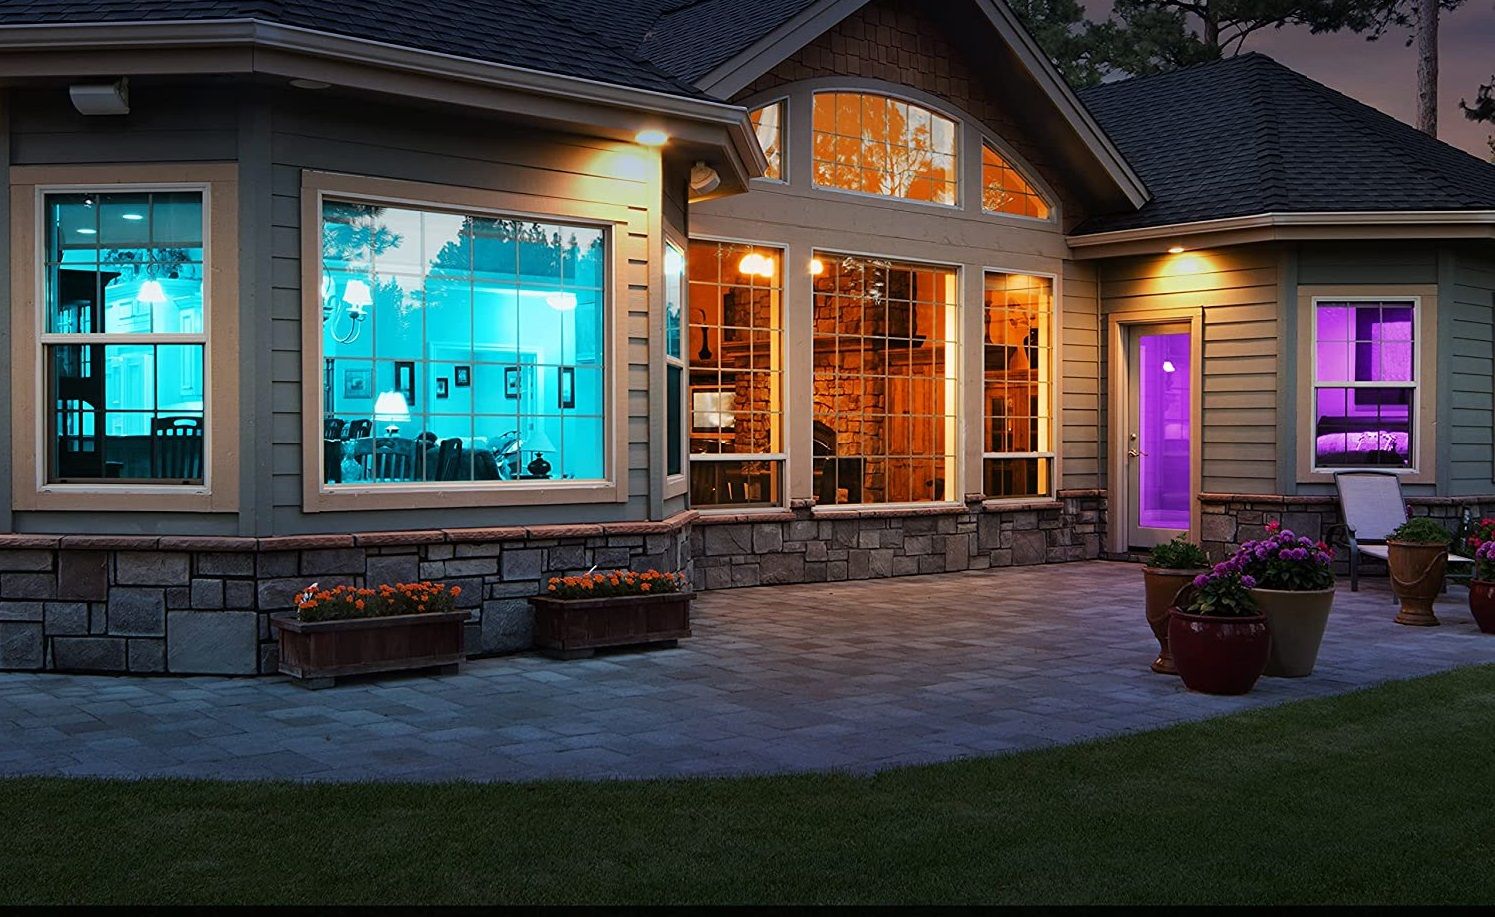 A house viewed from outside with some aqua lighting inside, some warm lighting inside and some purple lighting inside